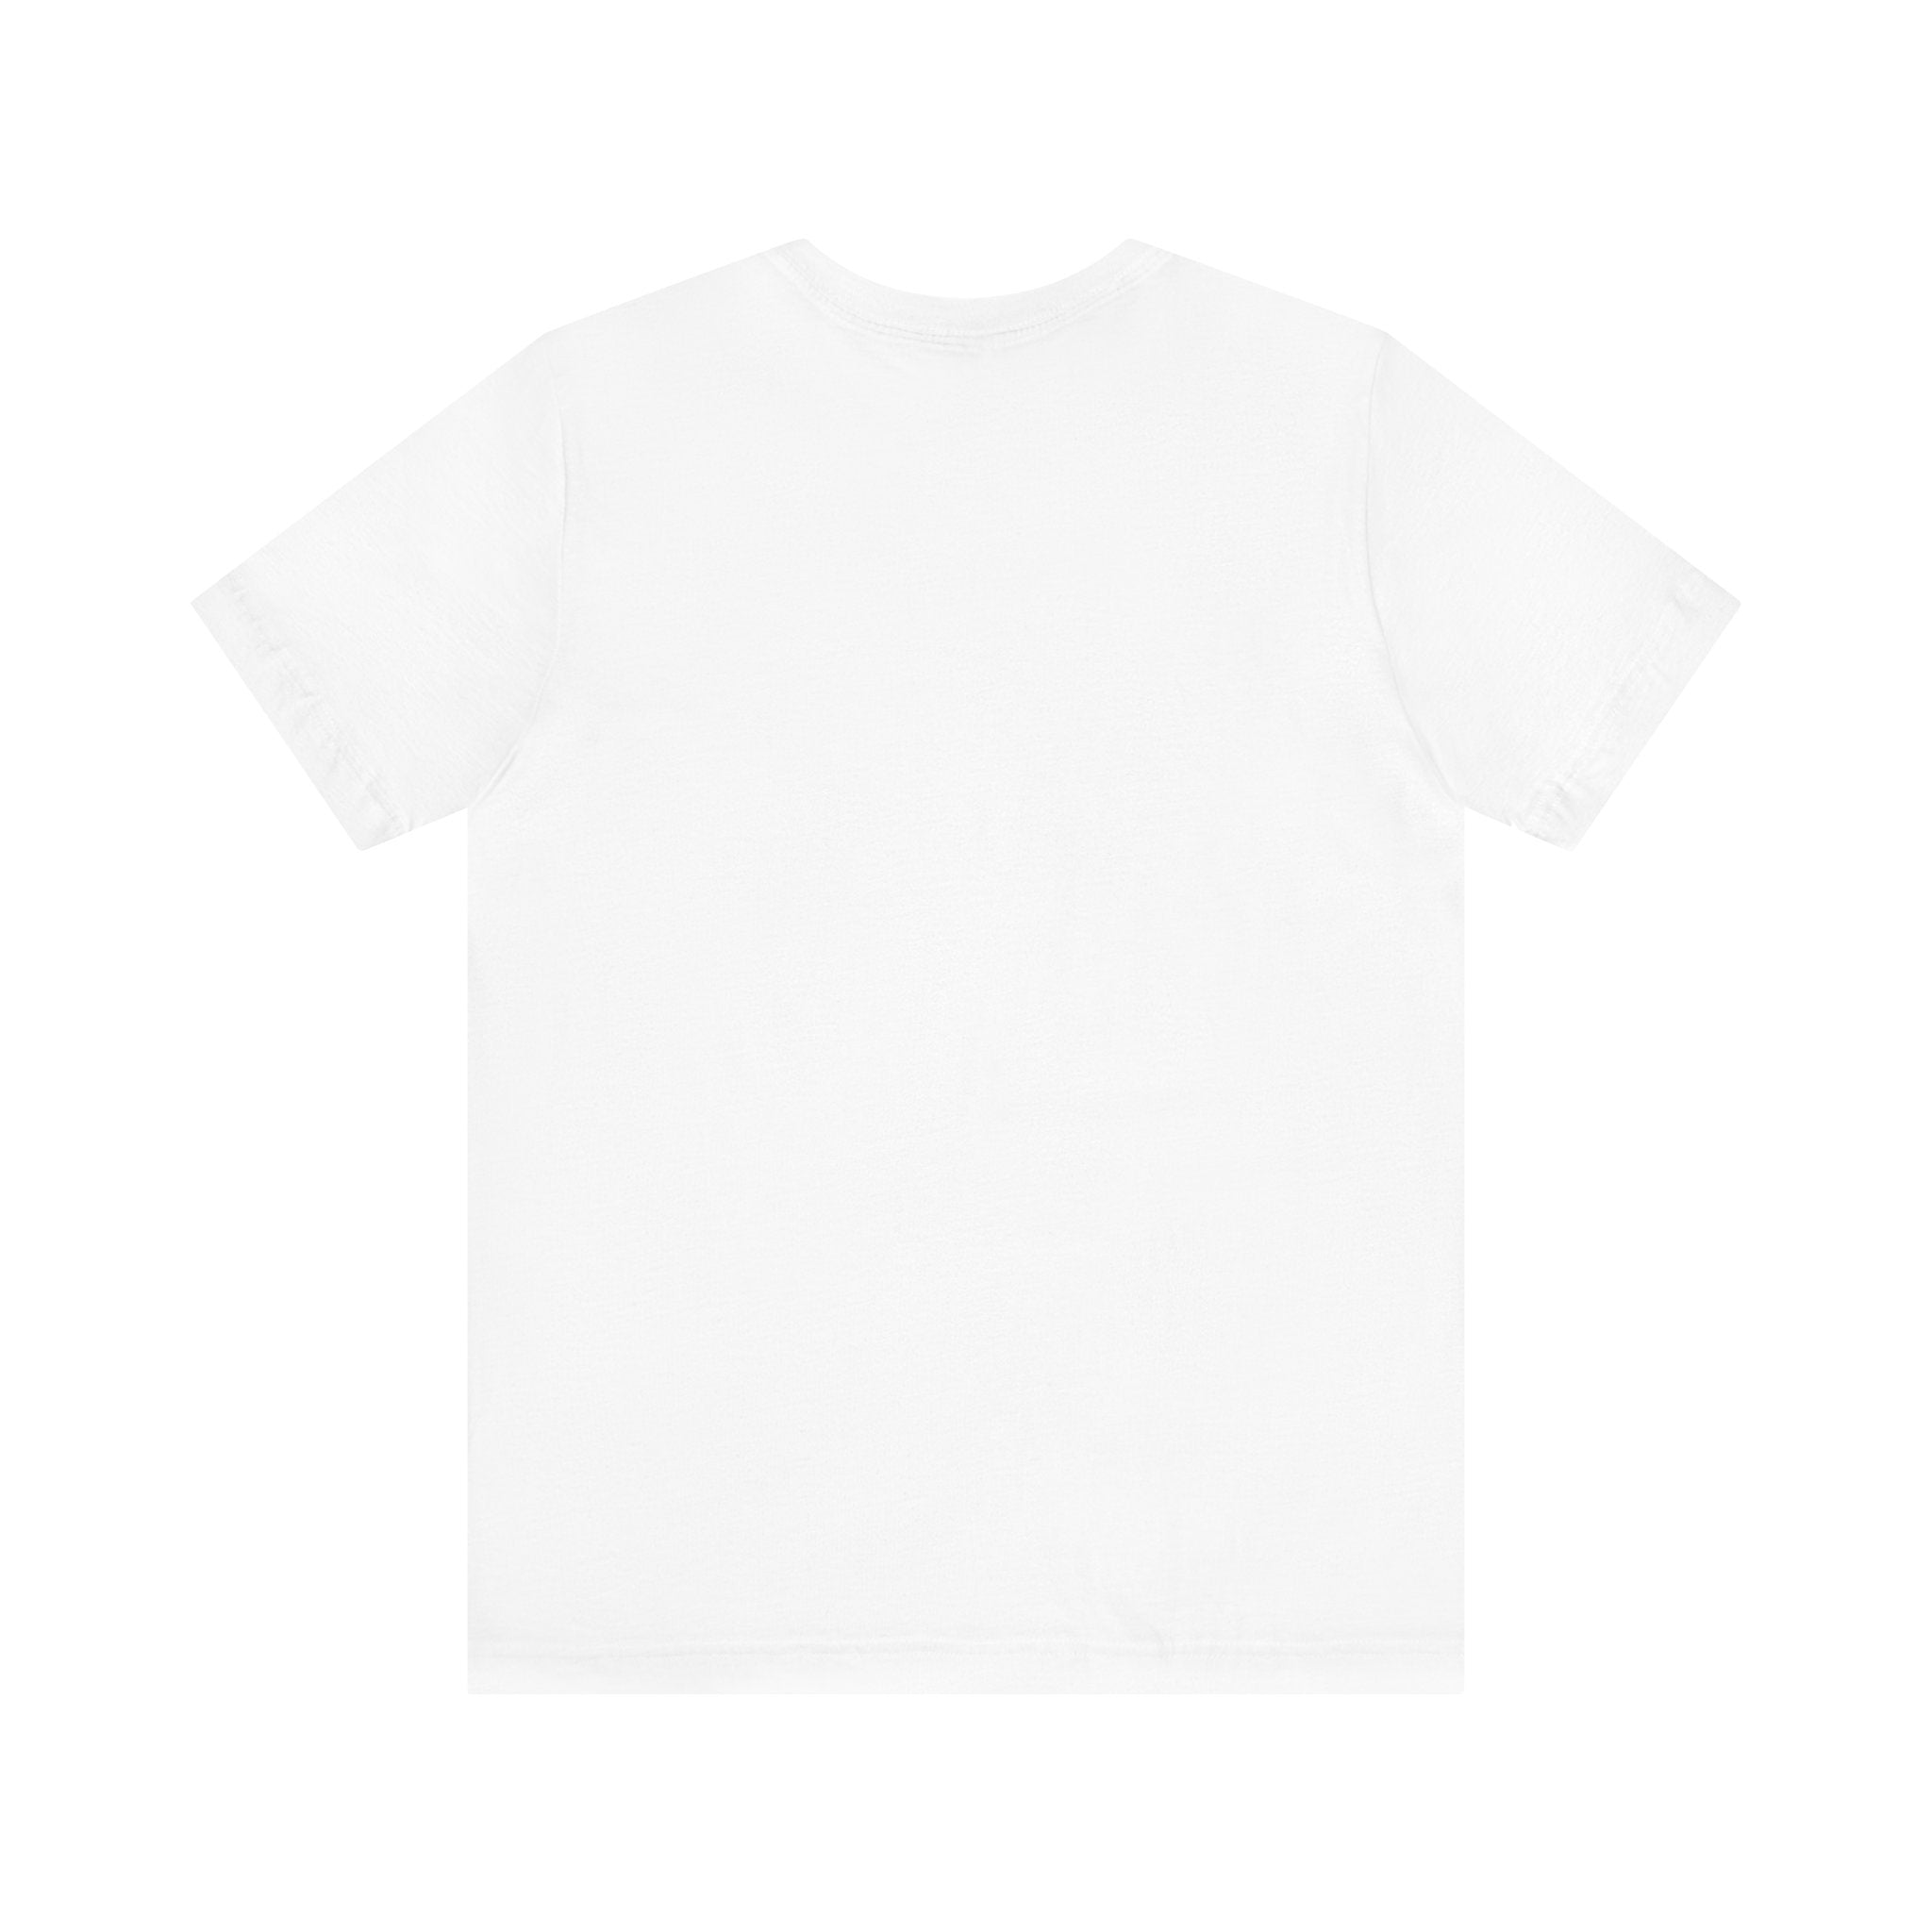 White Unisex T-Shirt with Small Logo, Direct-to-Garment Printed - Be Amazing by Soulshinecreators